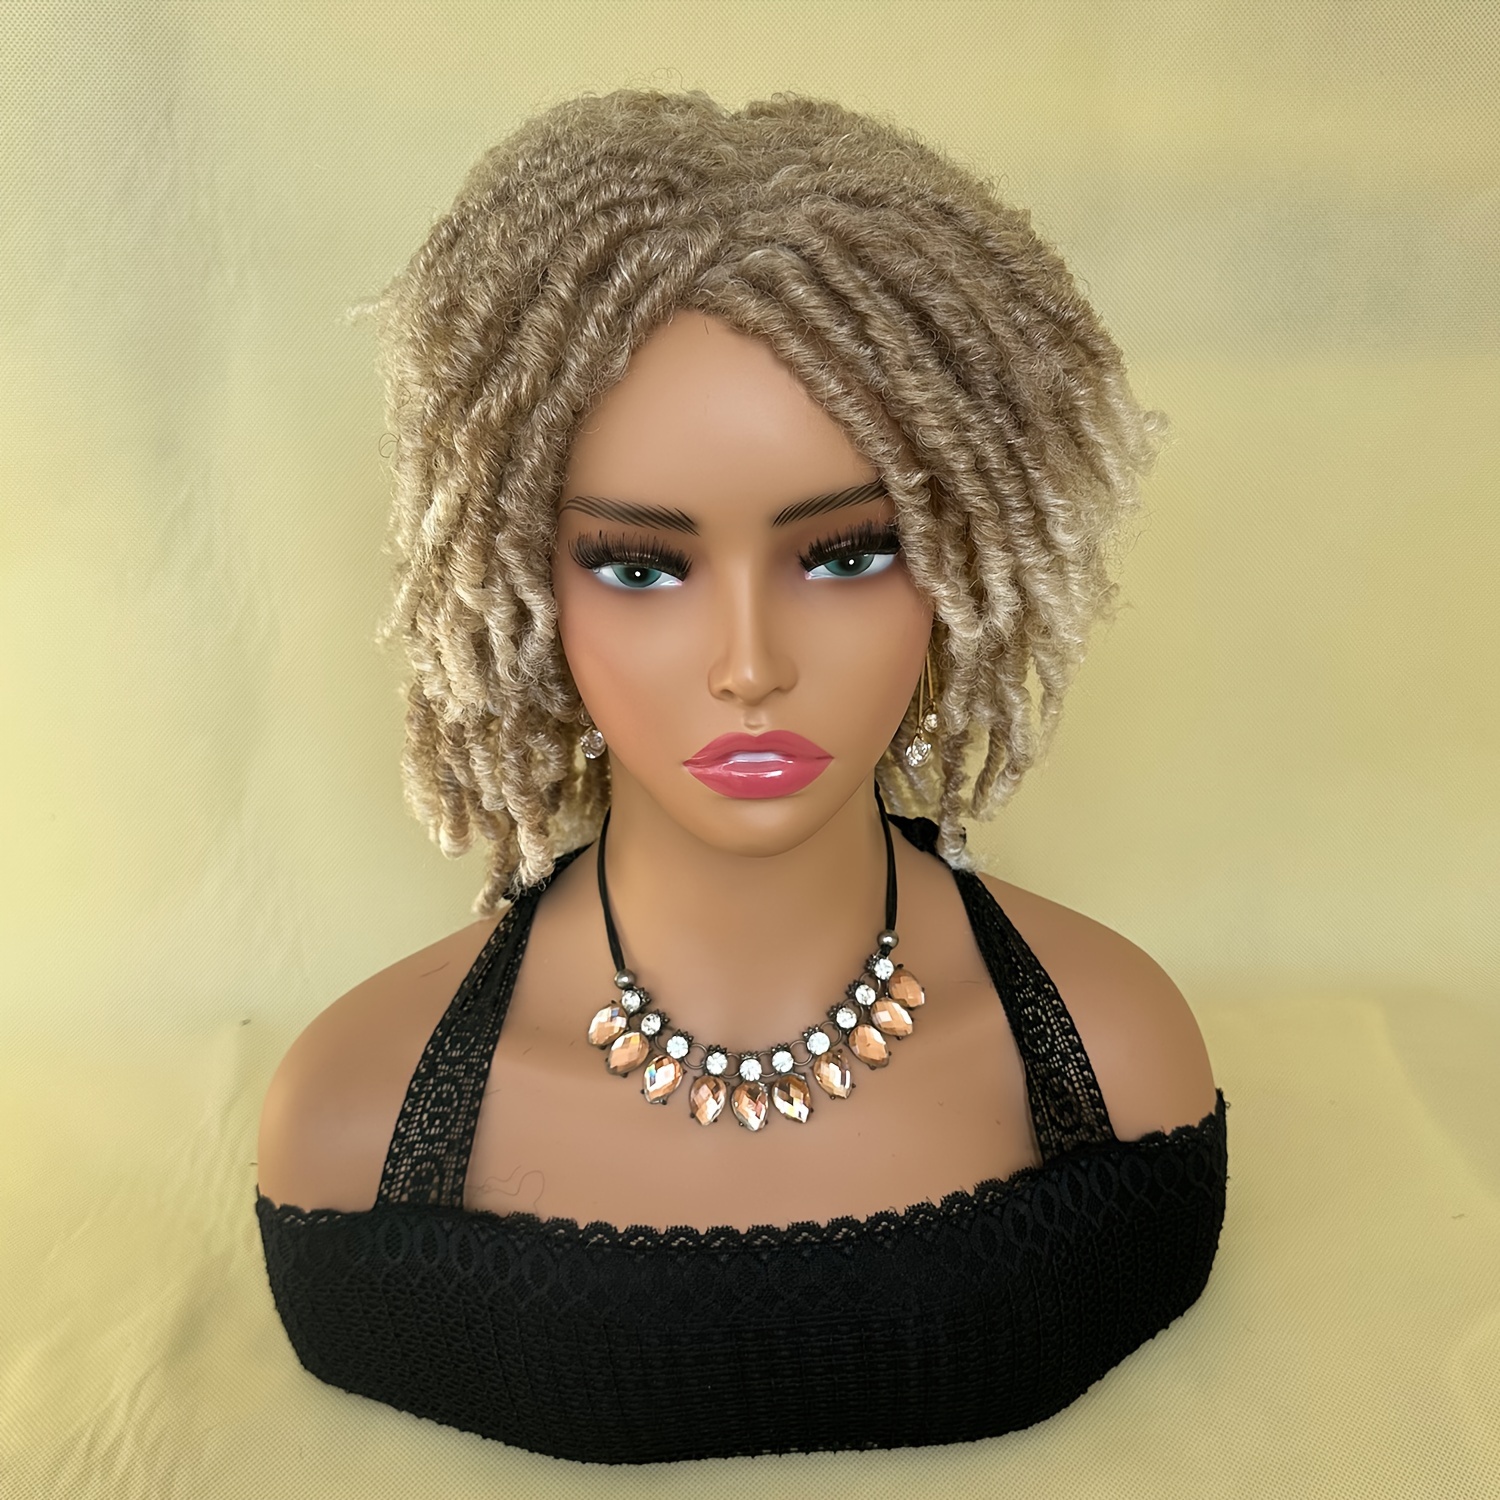 12 Inch Short Dreadlock Wigs For Women Afro Curly Synthetic Braided Wigs  Full Curly Faux Locs Crochet Hair Braiding Wigs